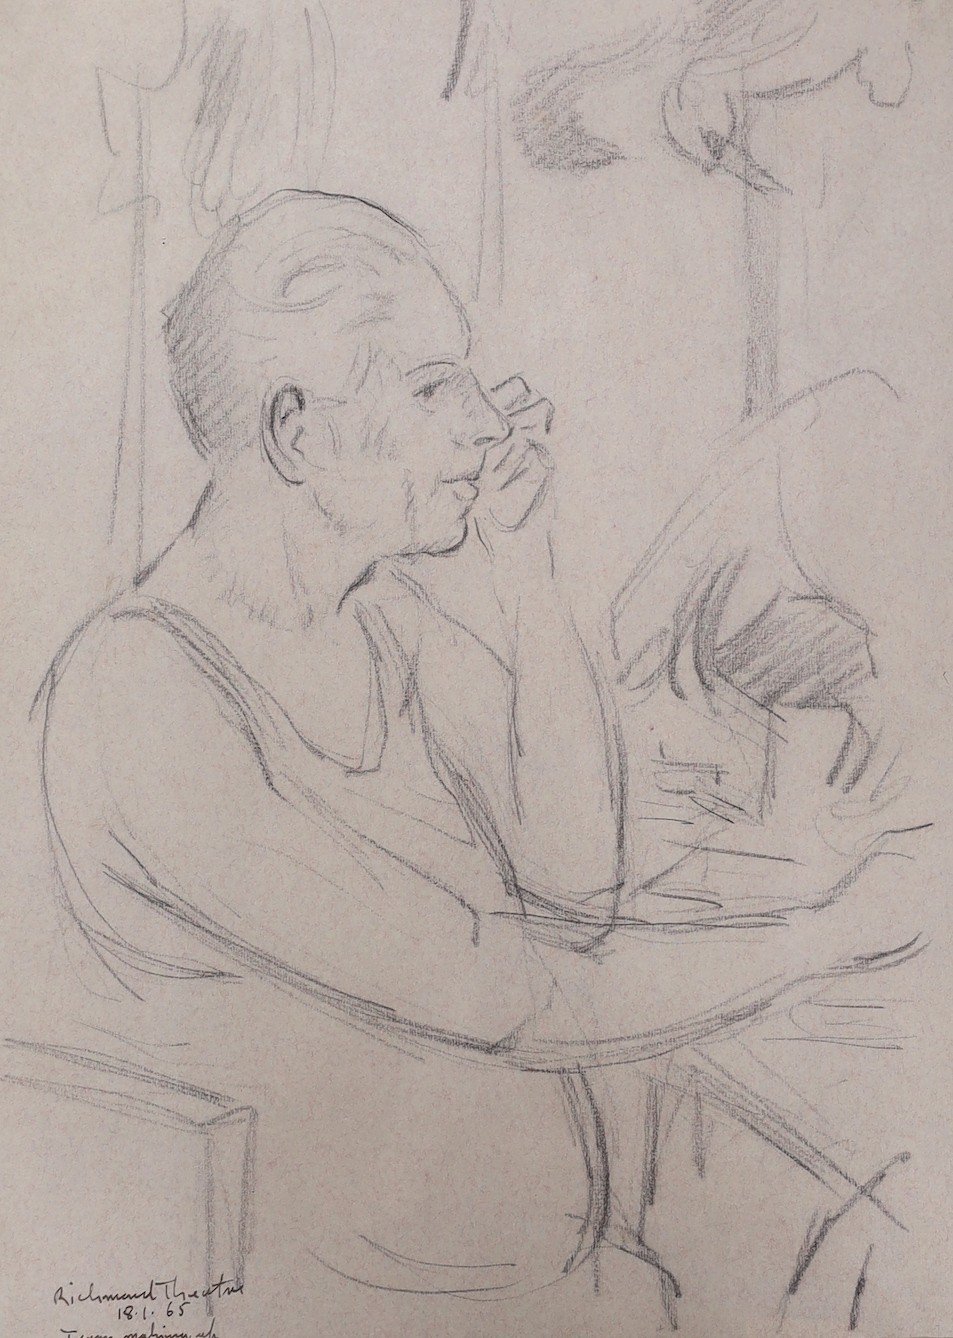 Clifford Hall (1904-1973), pencil drawing, 'Richmond Theatre 18.1.65, Terry Making Up', signed and dated, 37 x 27cm